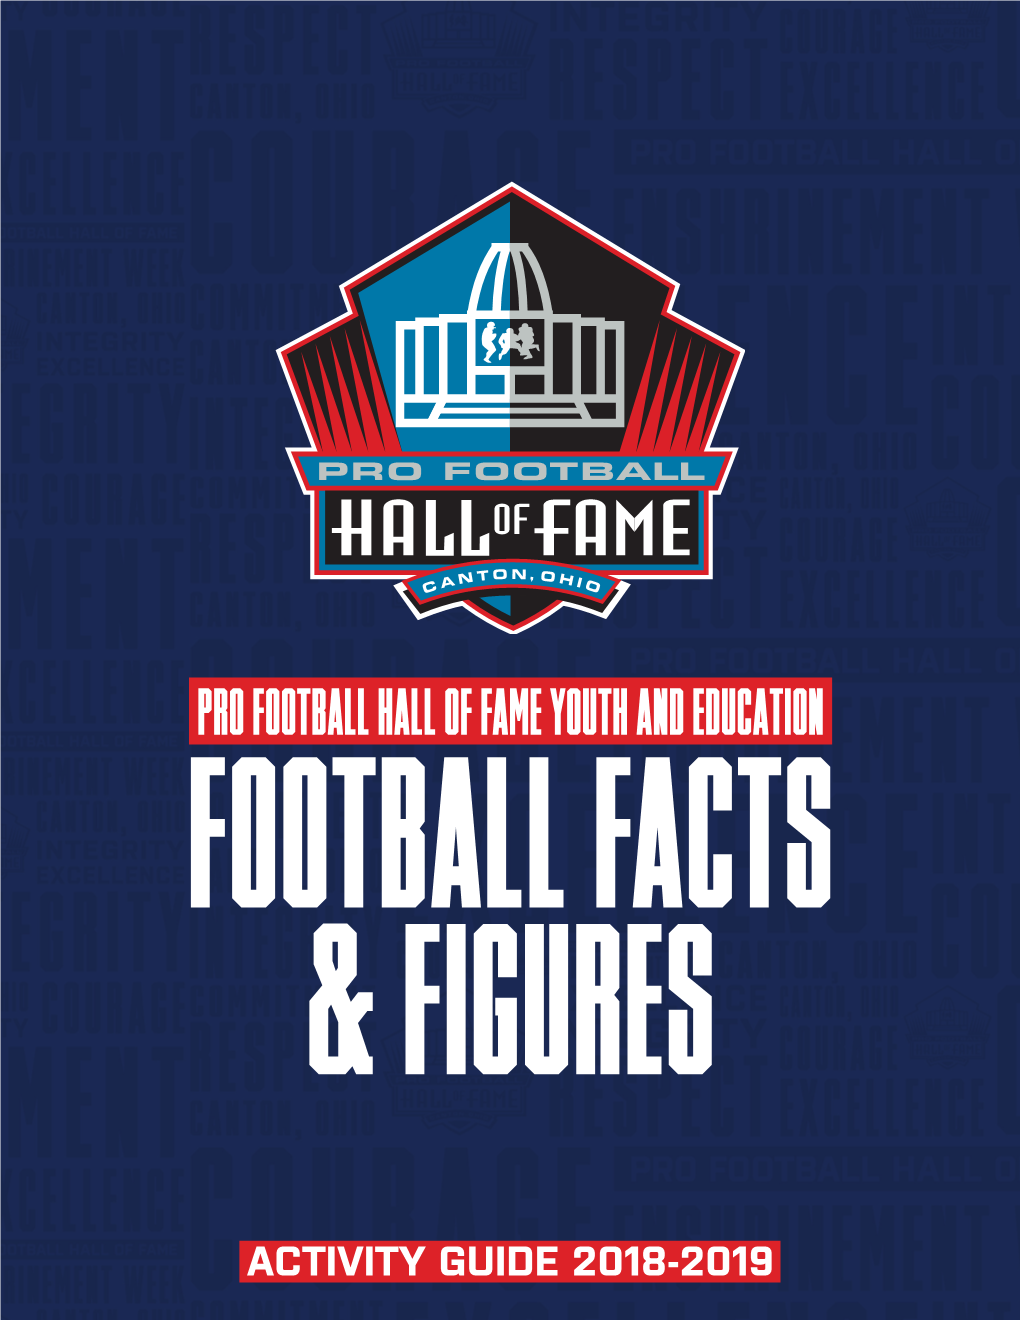 Football Facts & Figures